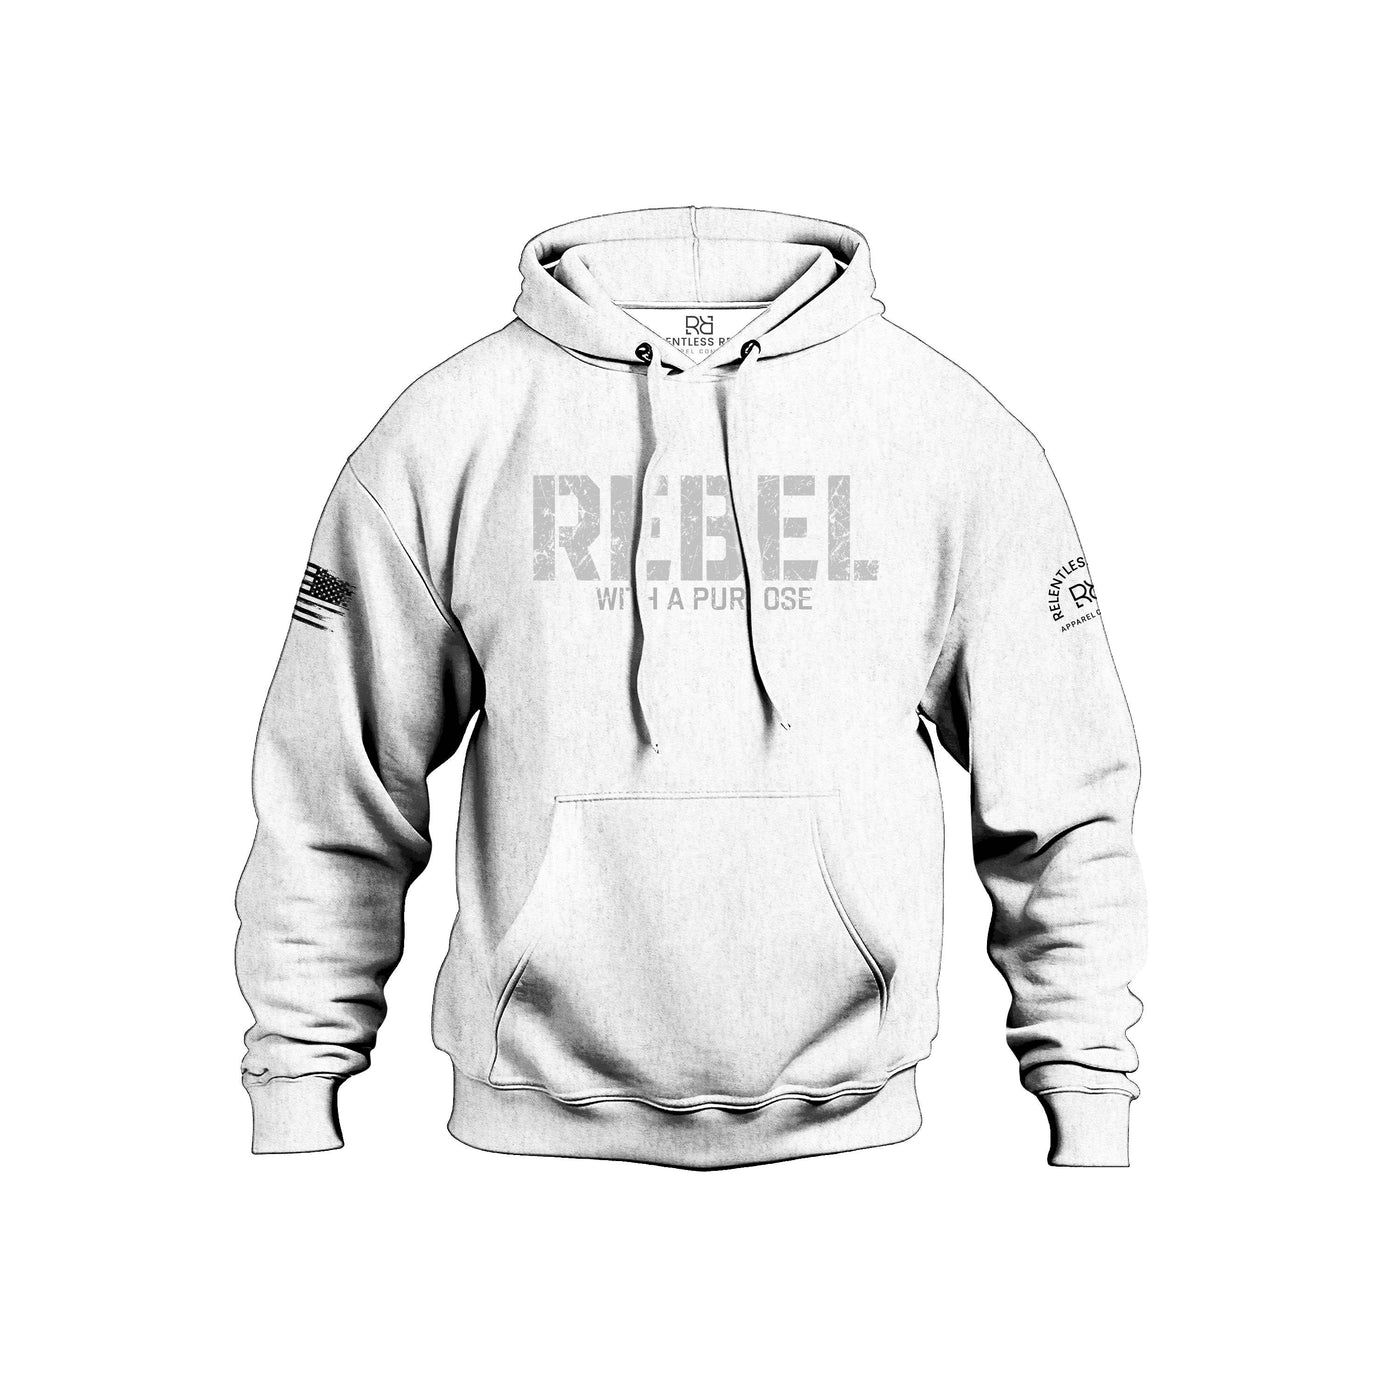 Relentless White Men's Rebel With A Purpose Front Design Hoodie